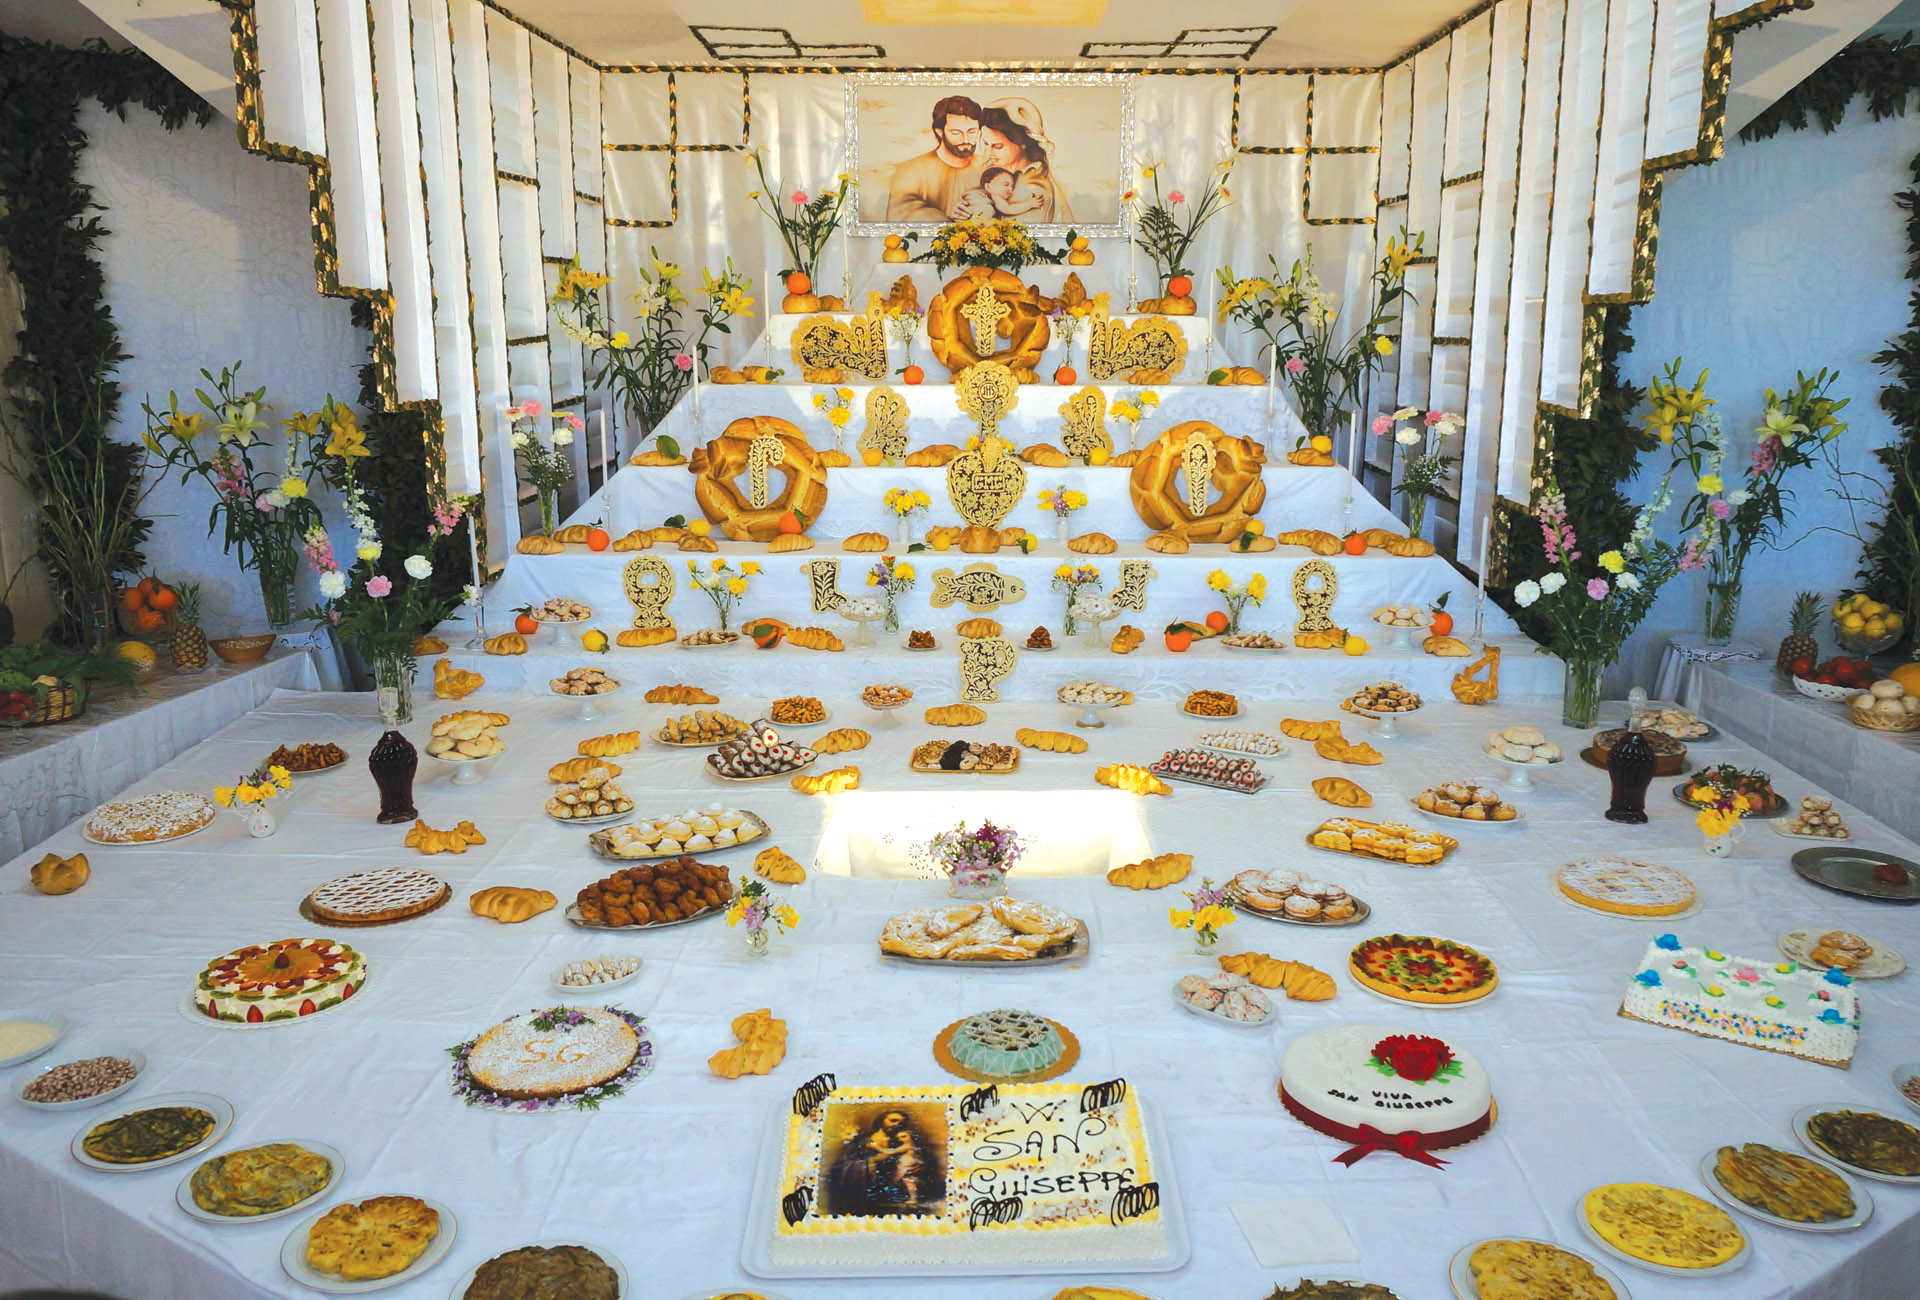 Large community altar with various desert cakes.